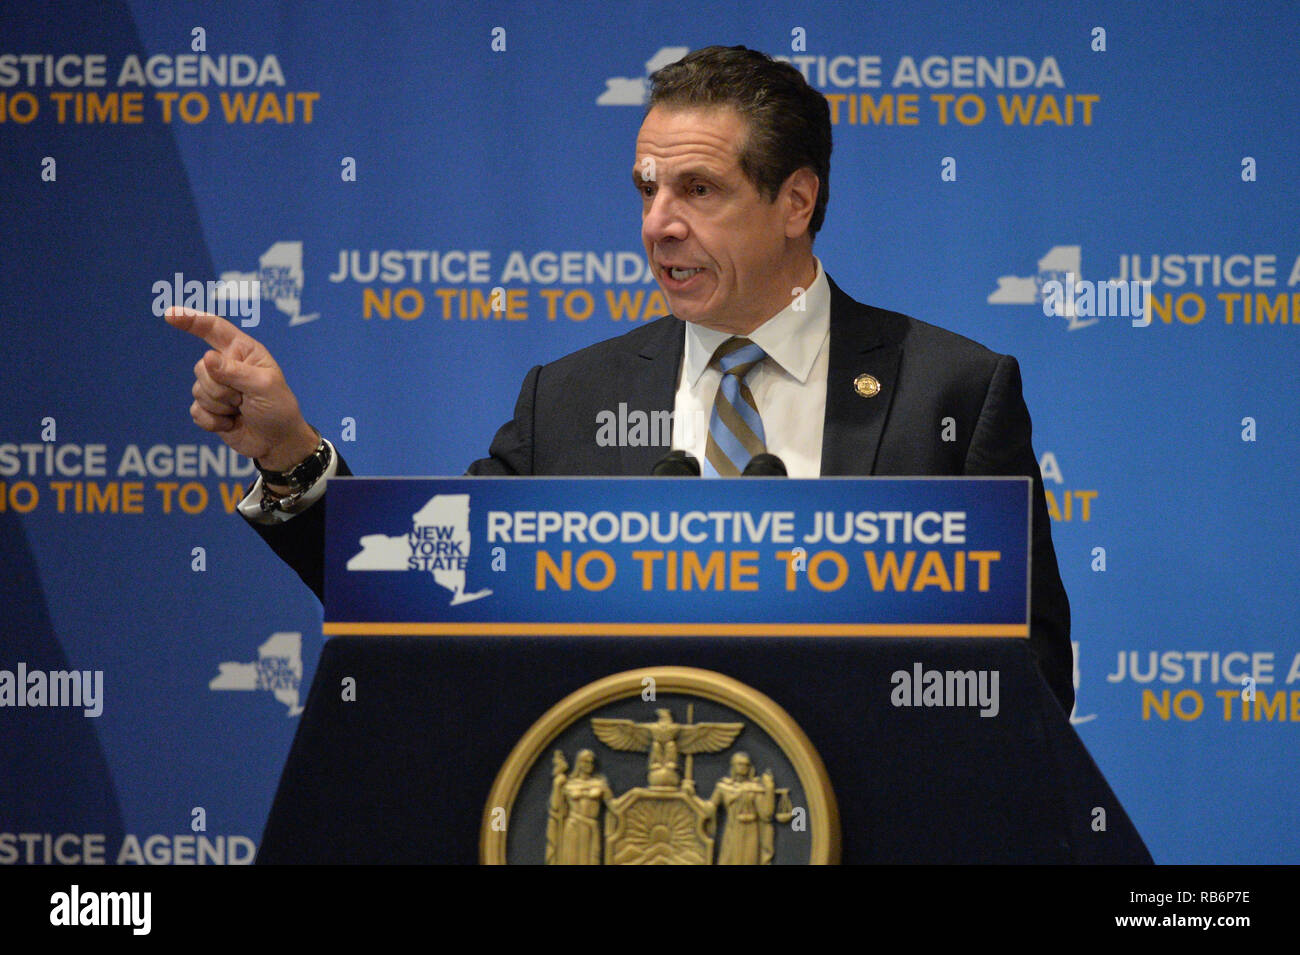 New York, USA. 7th January, 2019. Andrew Cuomo speaks about Reproductive Justice at Barnard College in New York. 07 Jan 2019 Credit: Erik Pendzich/Alamy Live News Stock Photo